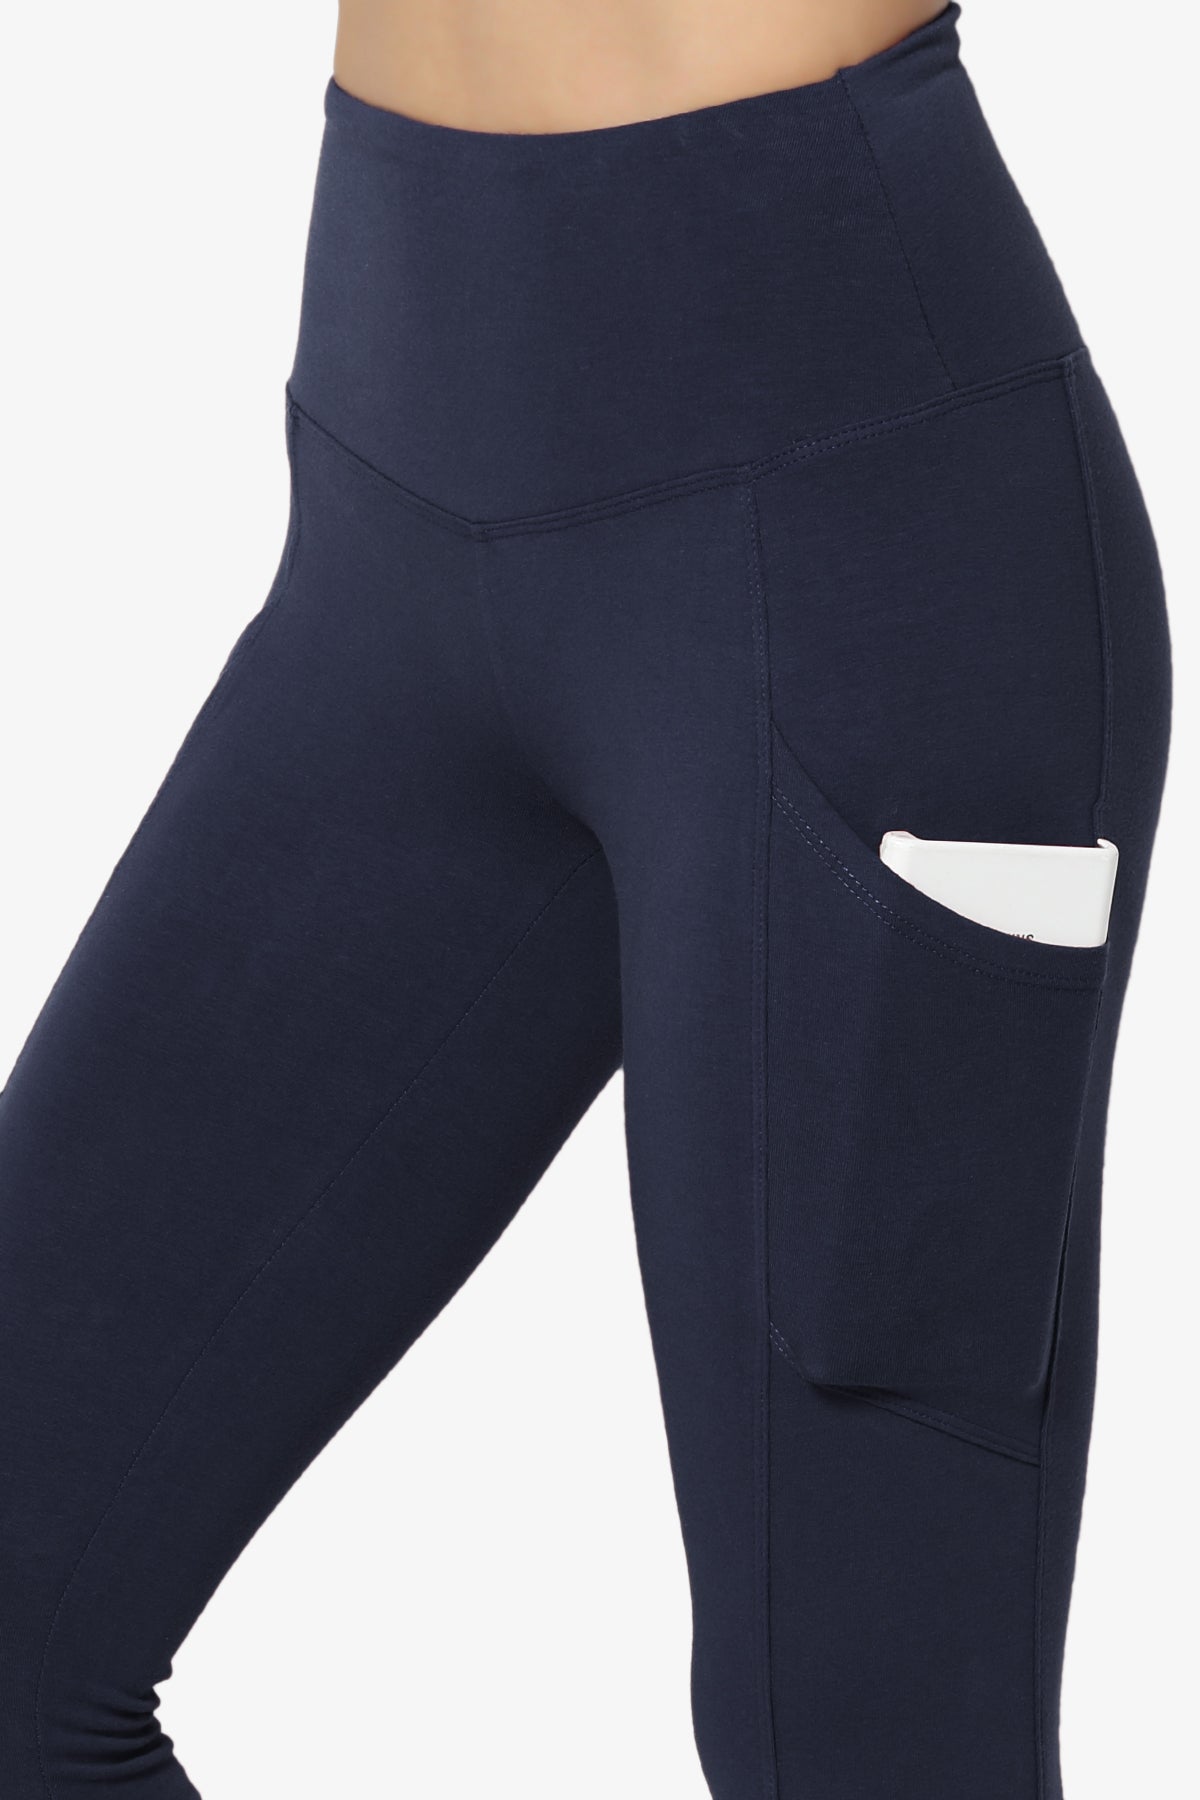 Ansley Luxe Cotton Leggings with Pockets NAVY_5